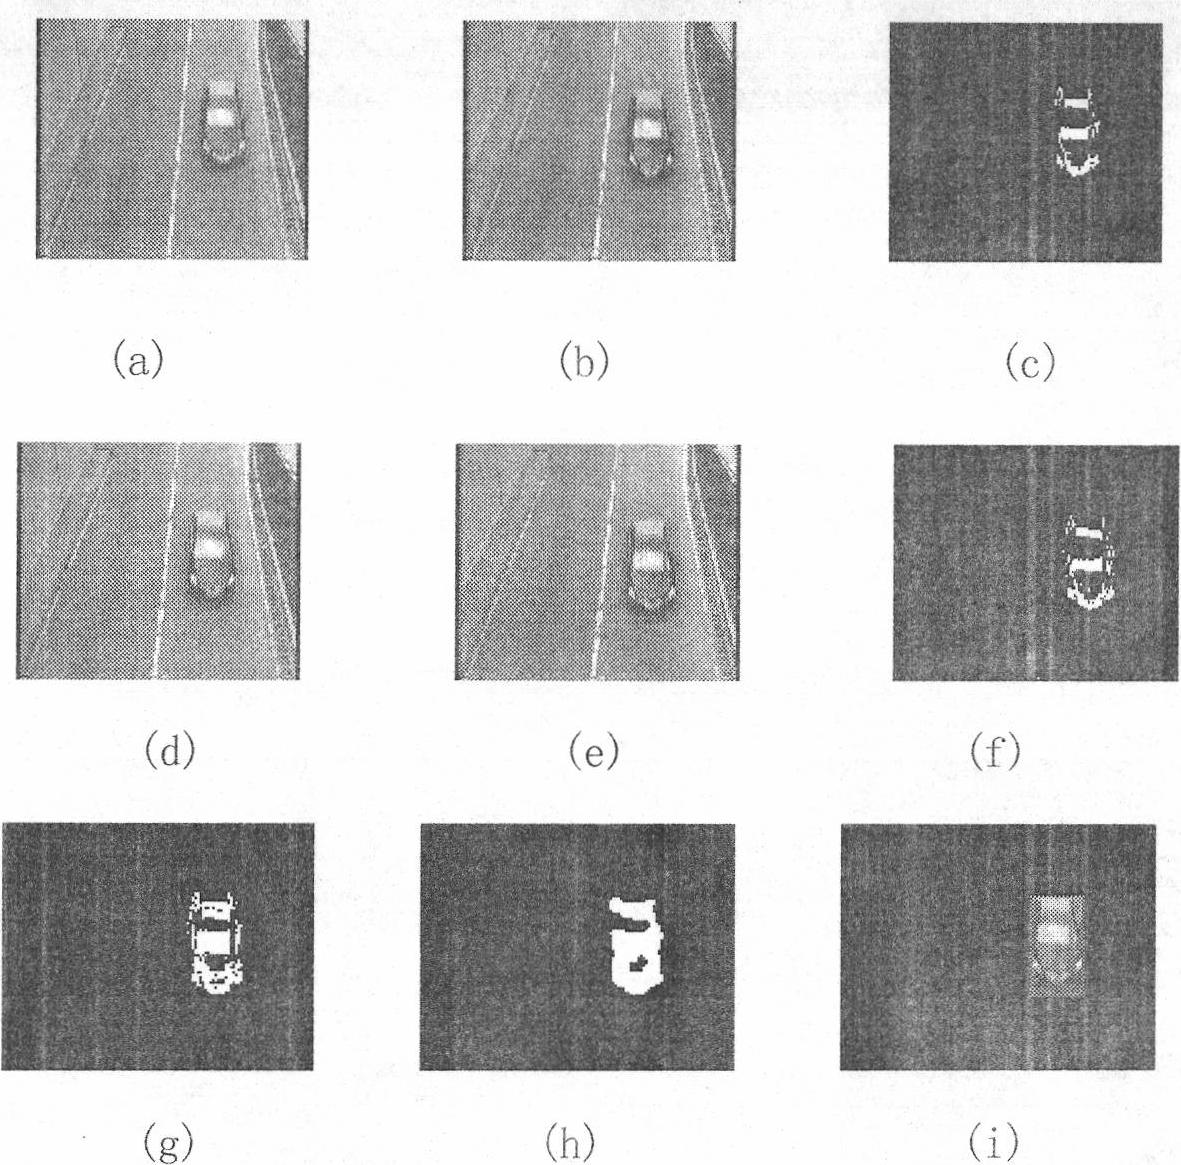 License plate character recognition method based on real-time vehicle tracking and binary index classification